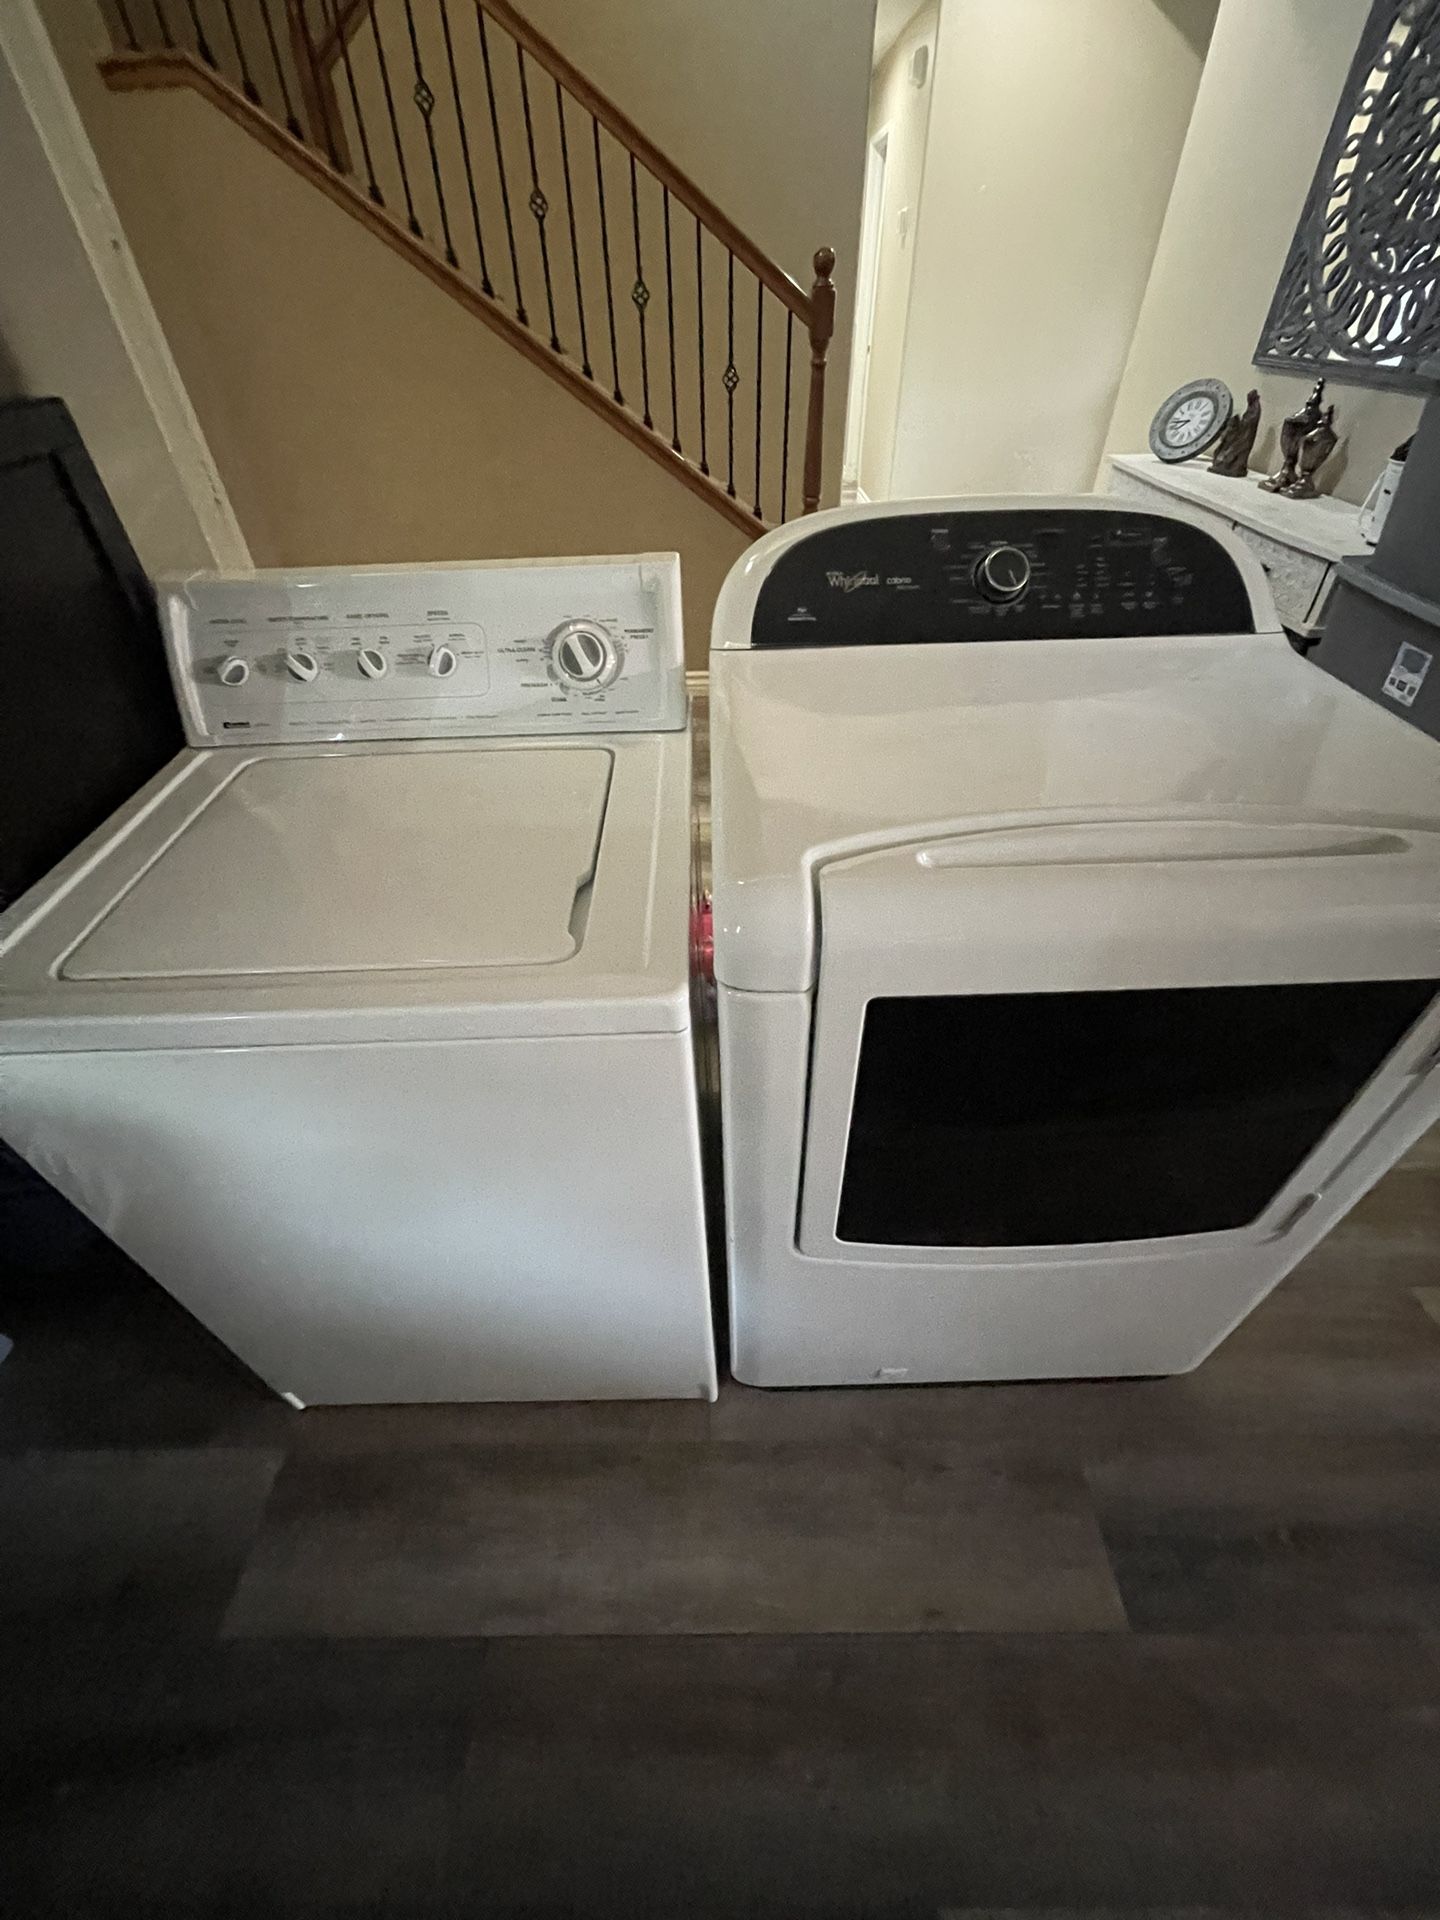 washer and dryer $350